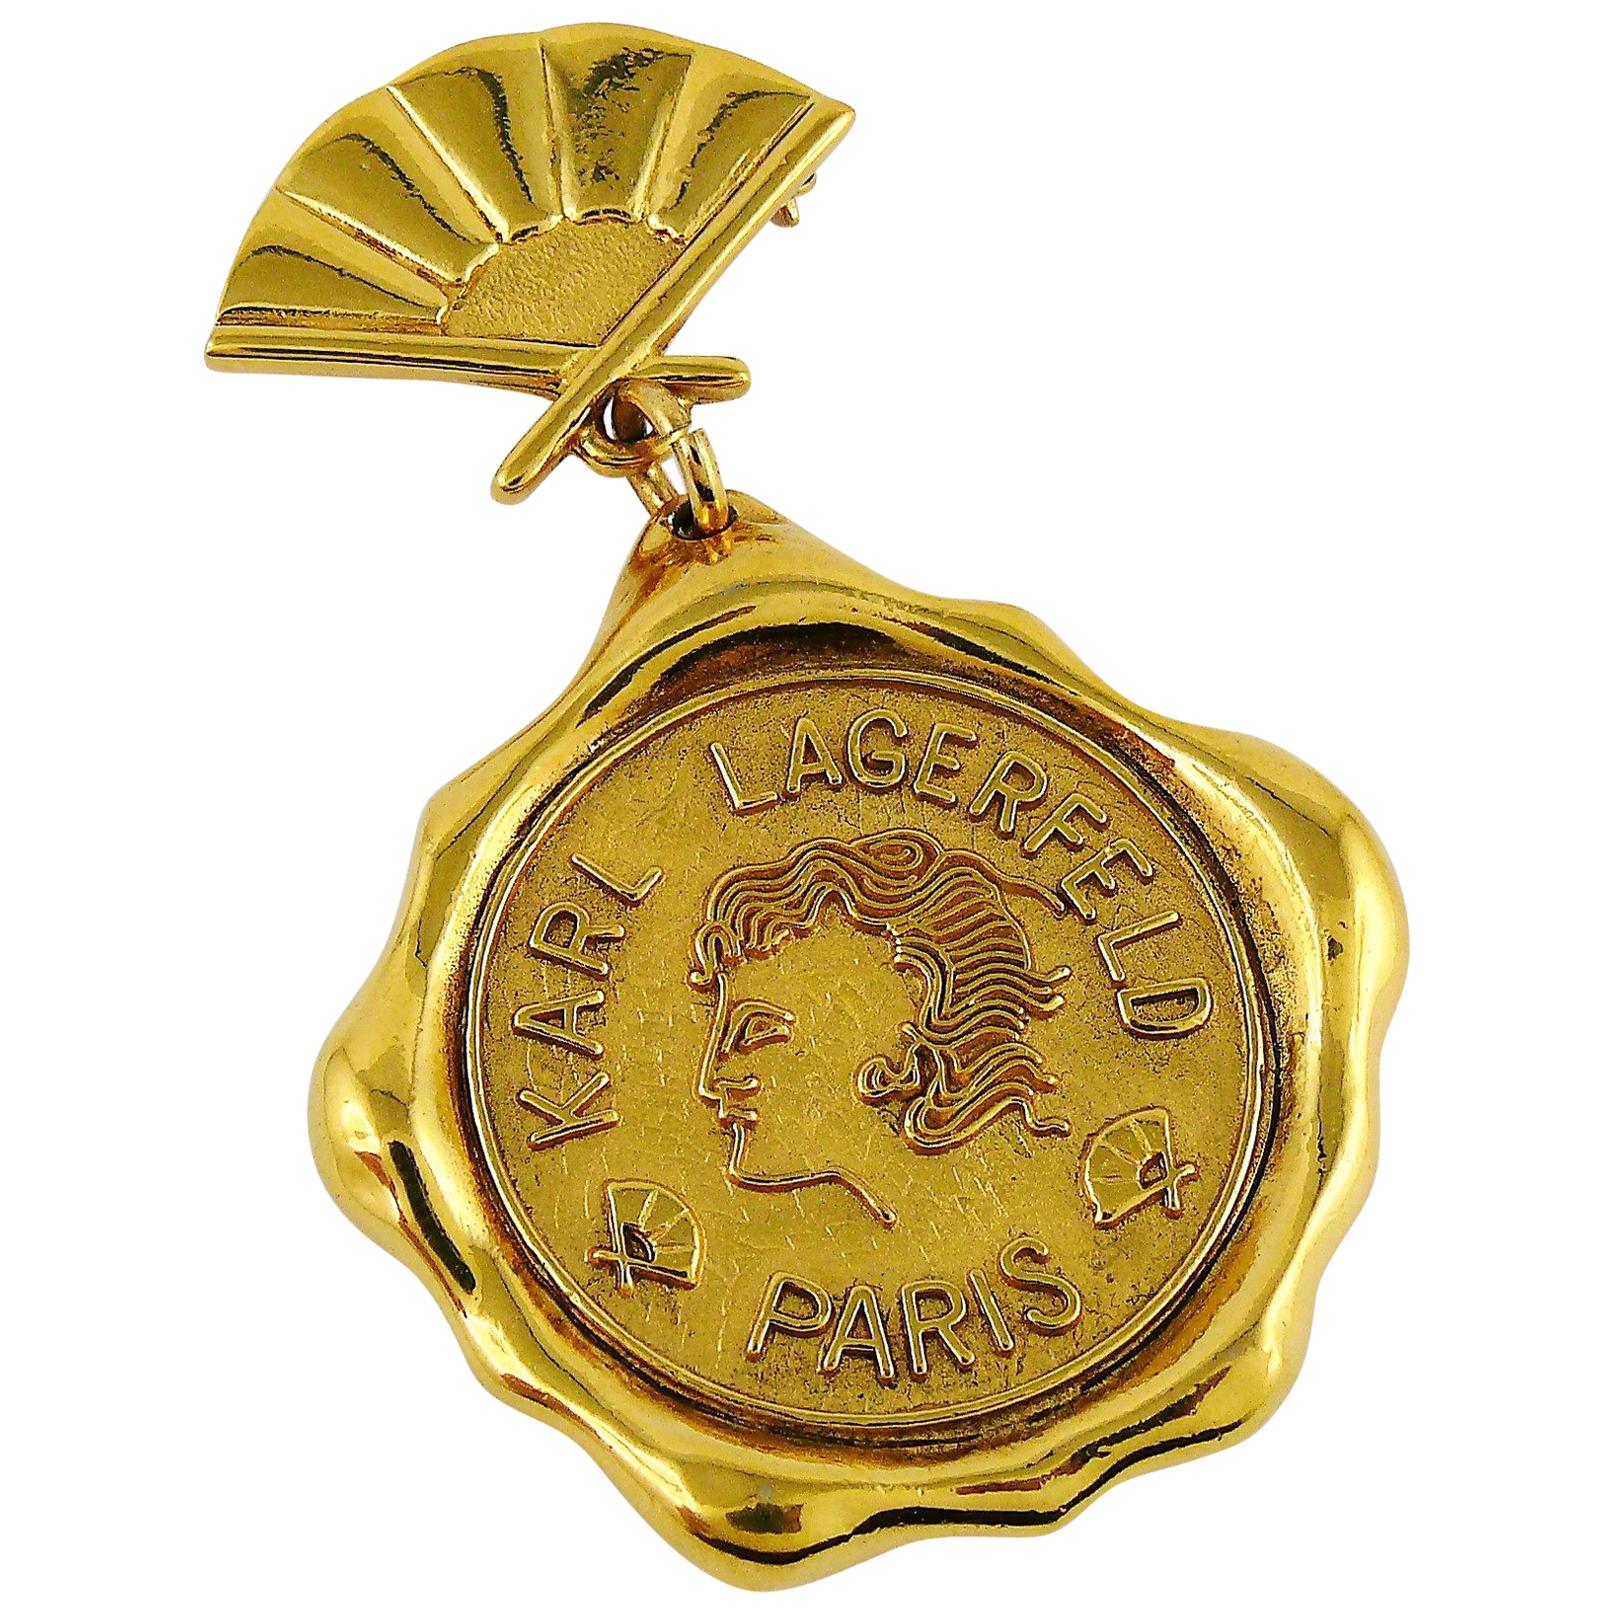 Karl Lagerfeld Vintage Massive Gold Toned Wax Seal and Fan Brooch